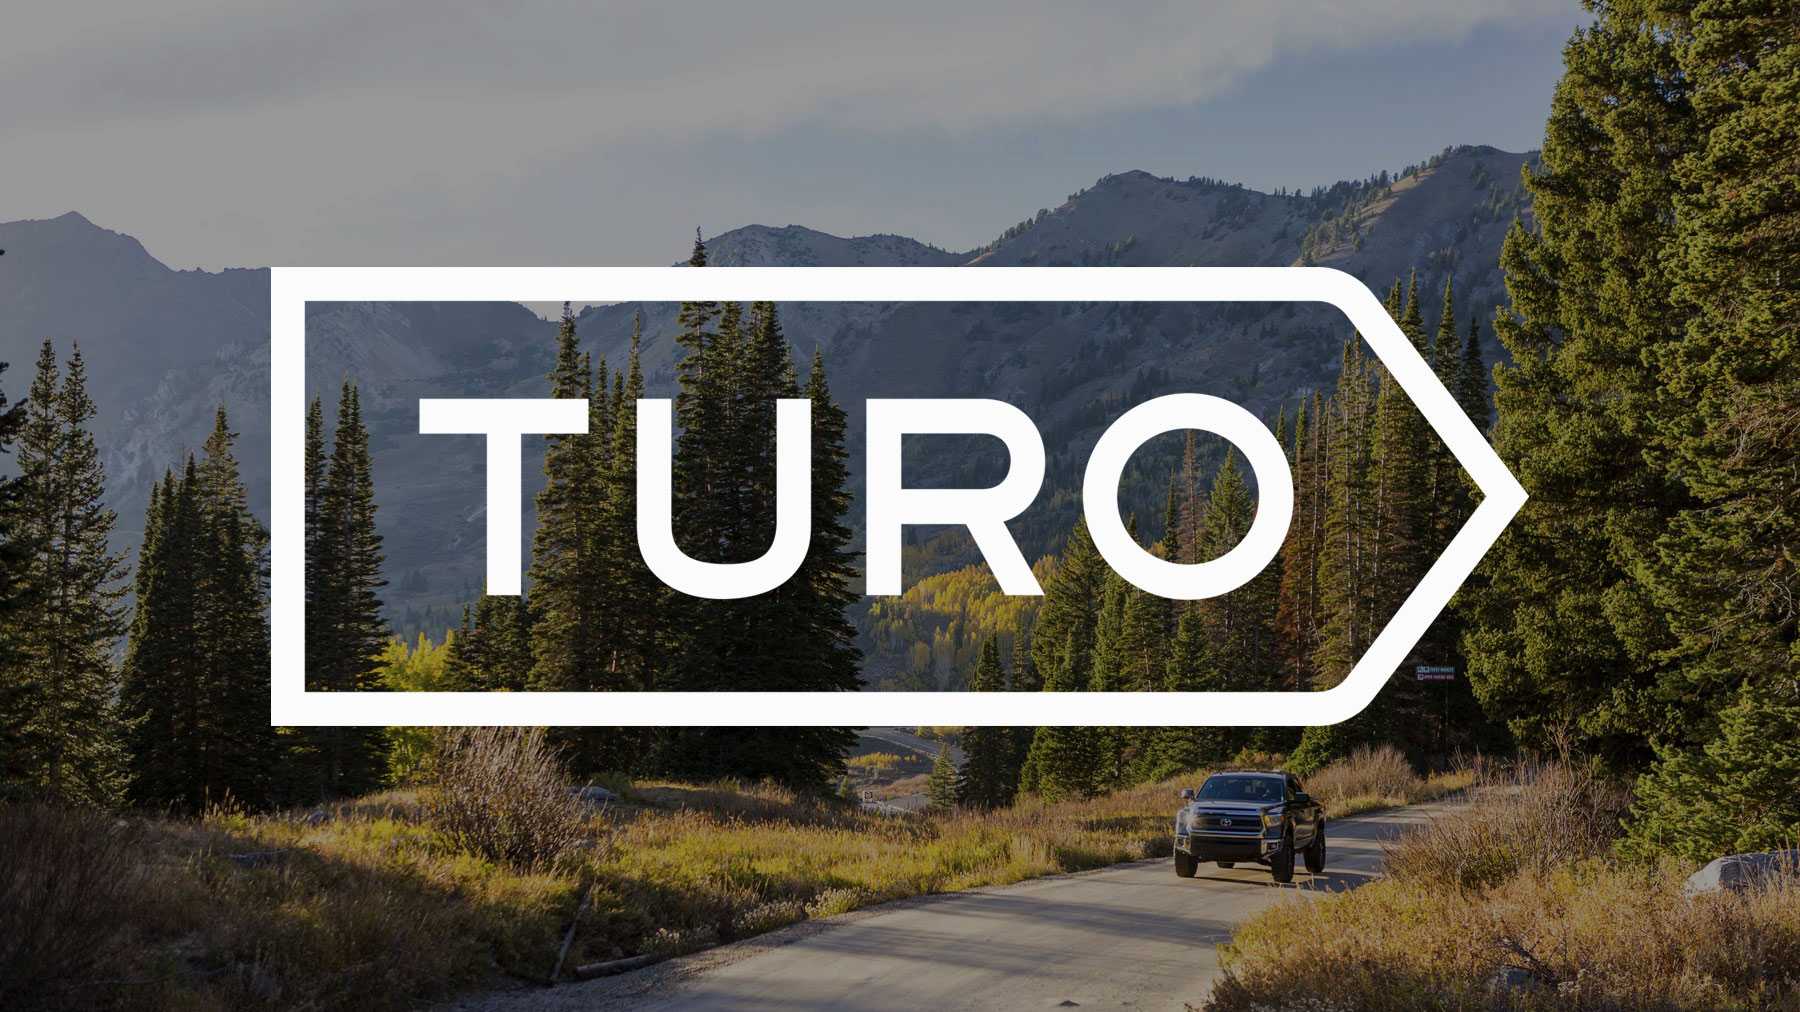 rent on turo to make $2,000 fast